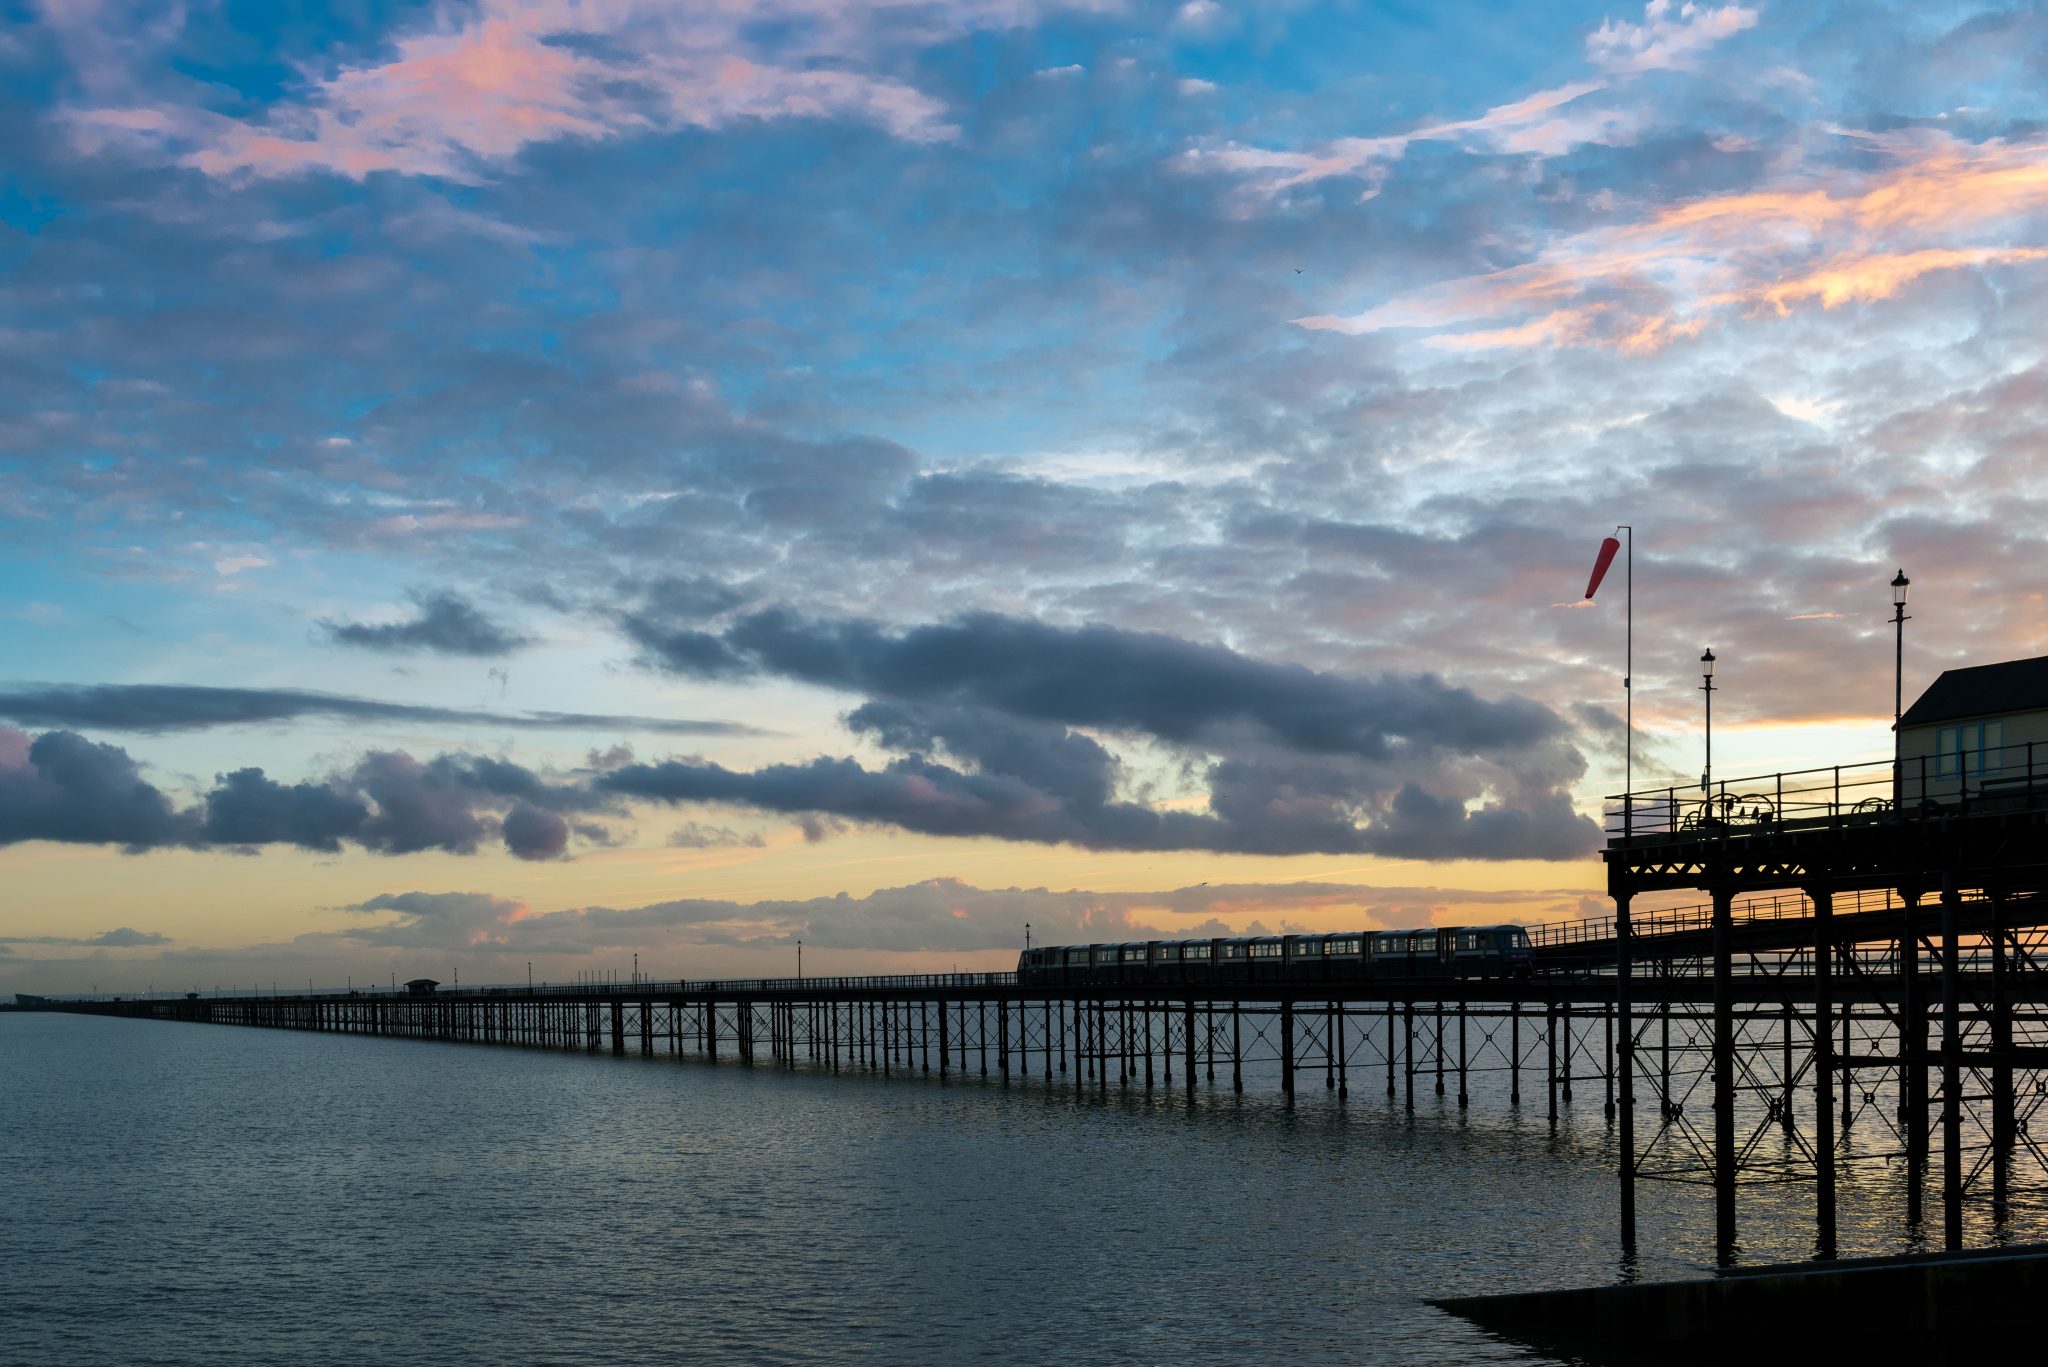 Southend pier at sunset with train